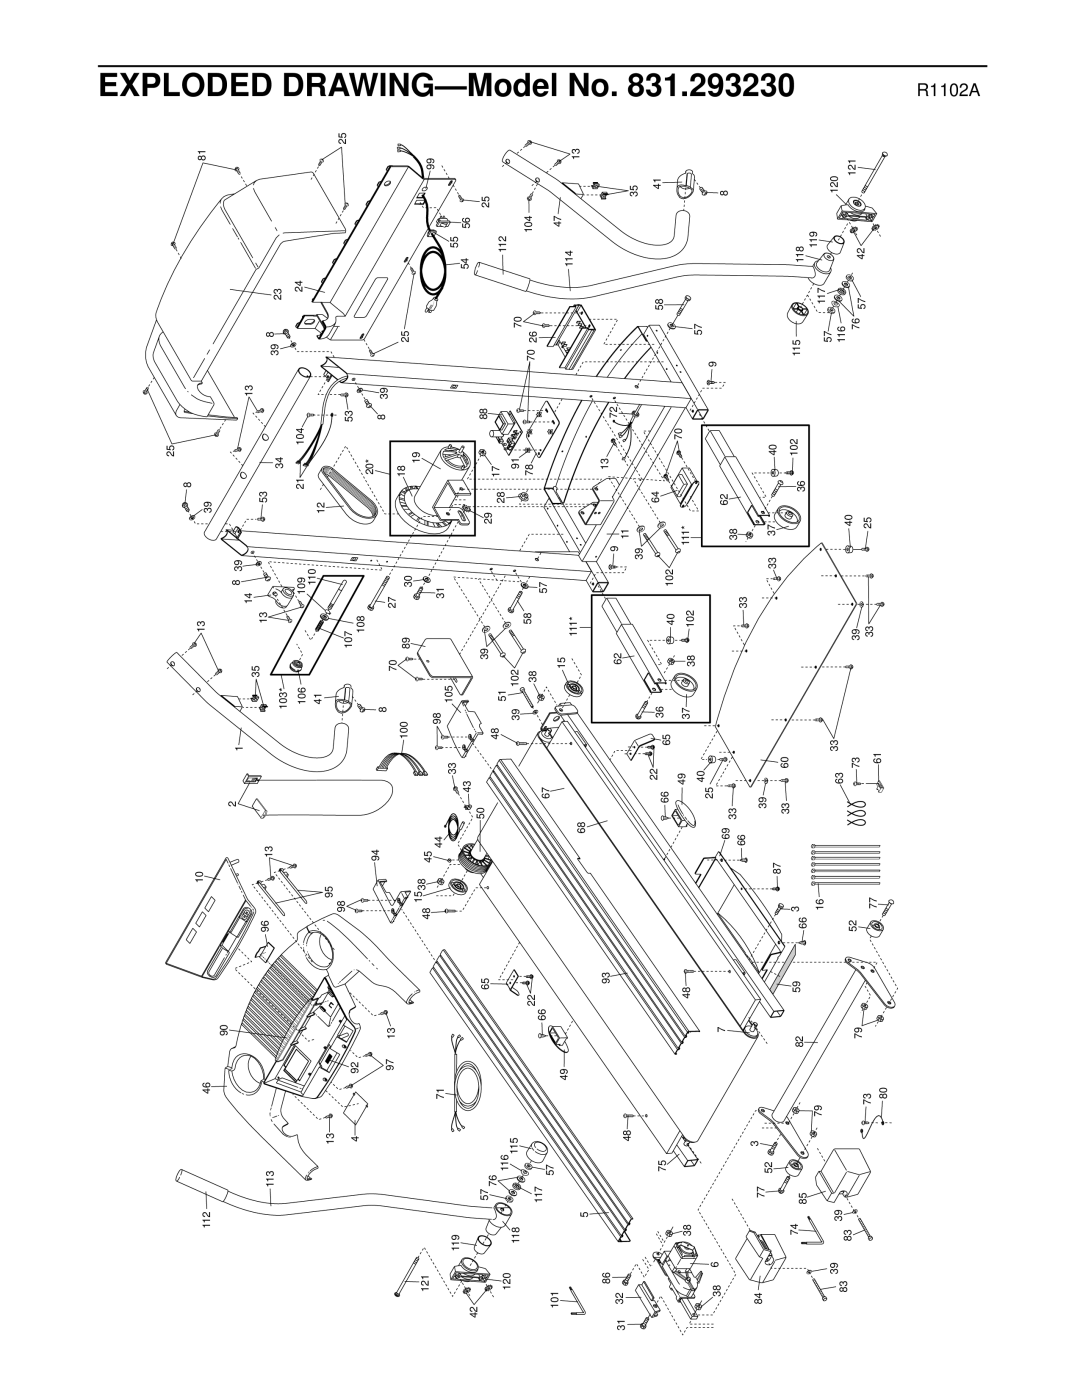 ProForm 831.293230 user manual DRAWING-Model, R1102A, Exploded 